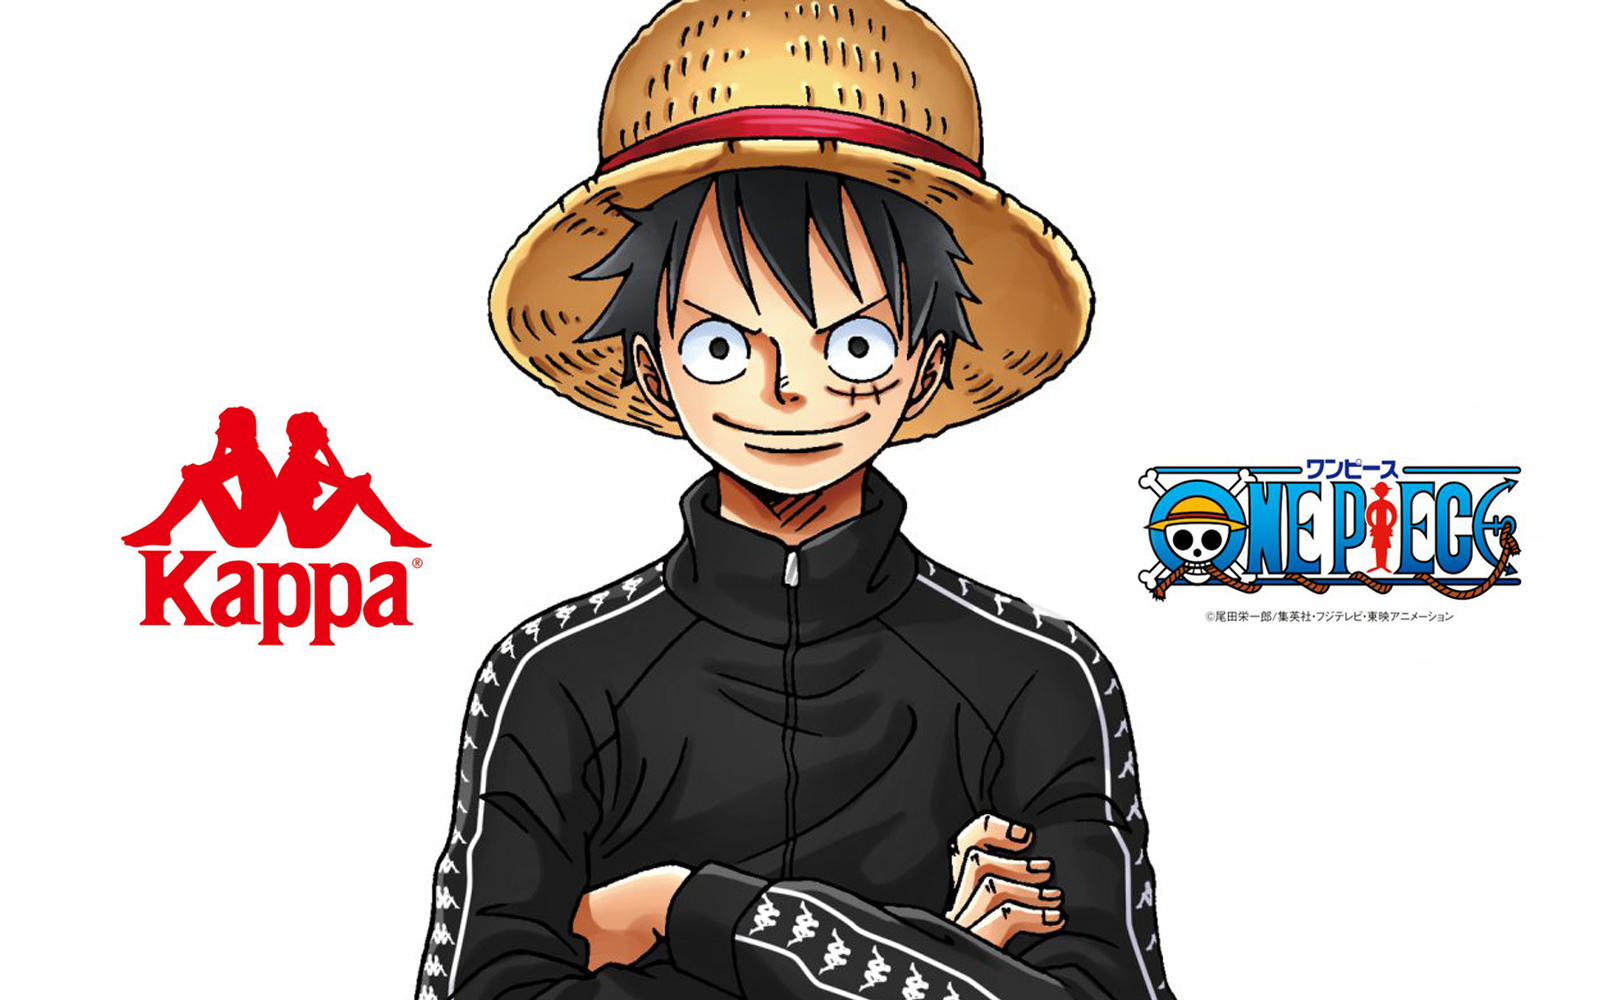 Turbine gnier Necessities Six characters from One Piece reinterpretate the iconic logo by Kappa